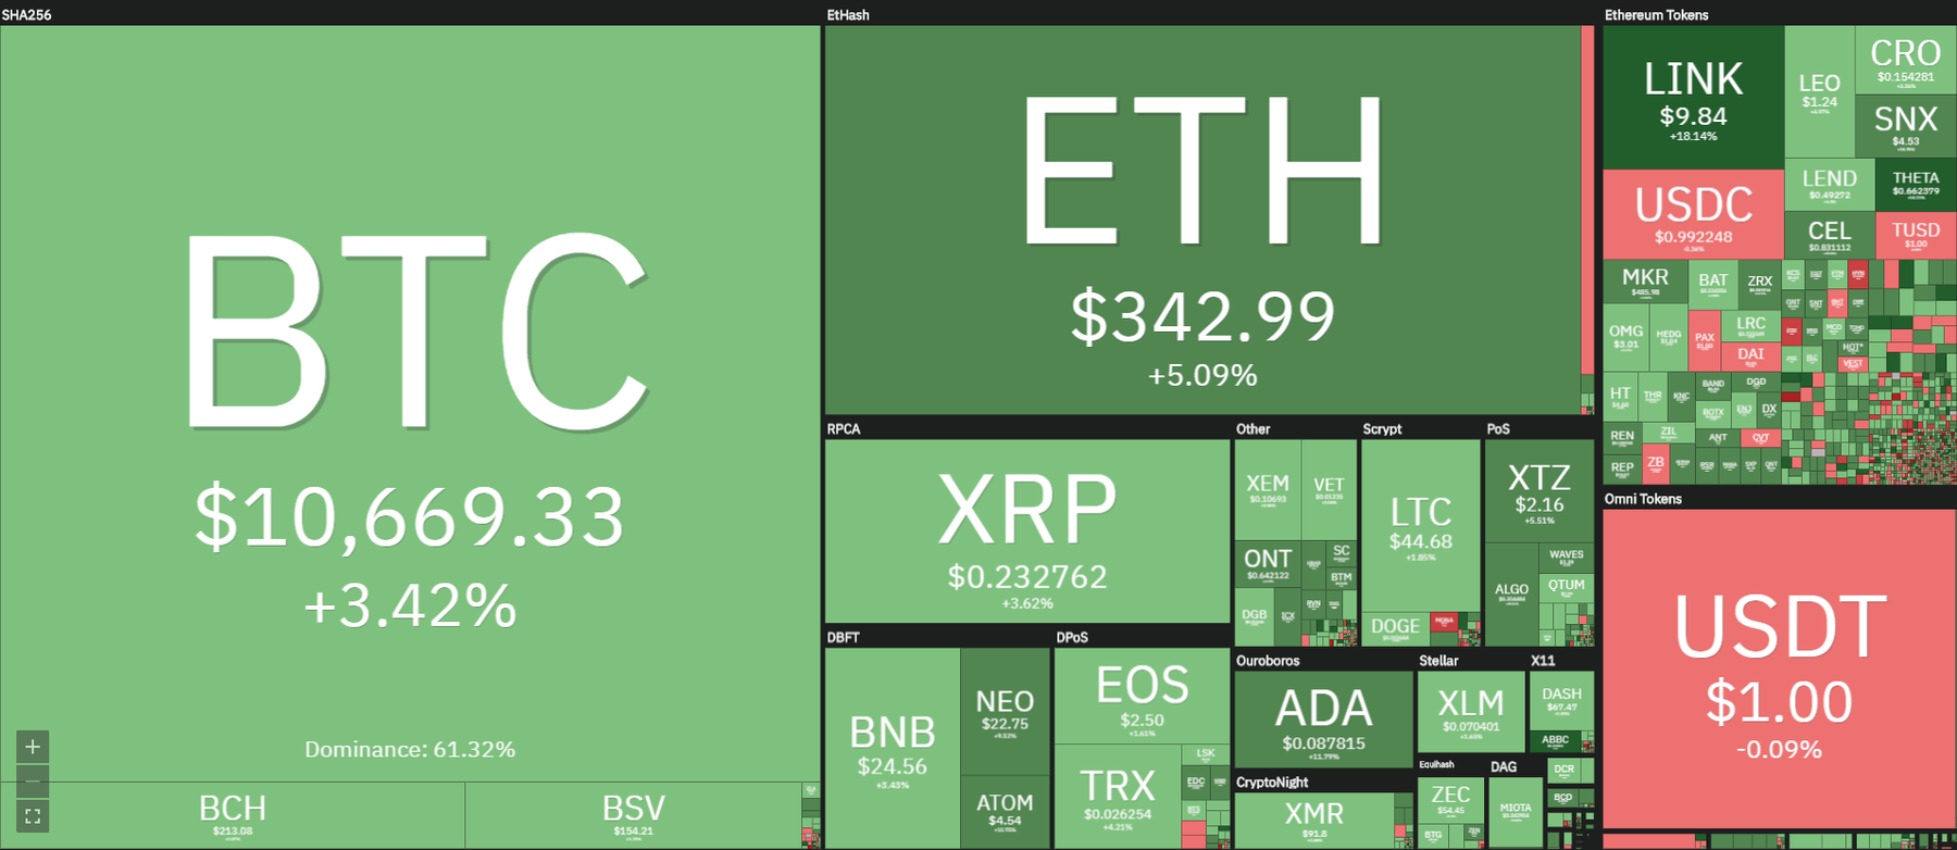 Coin Heat-Map Taken From coin360.com